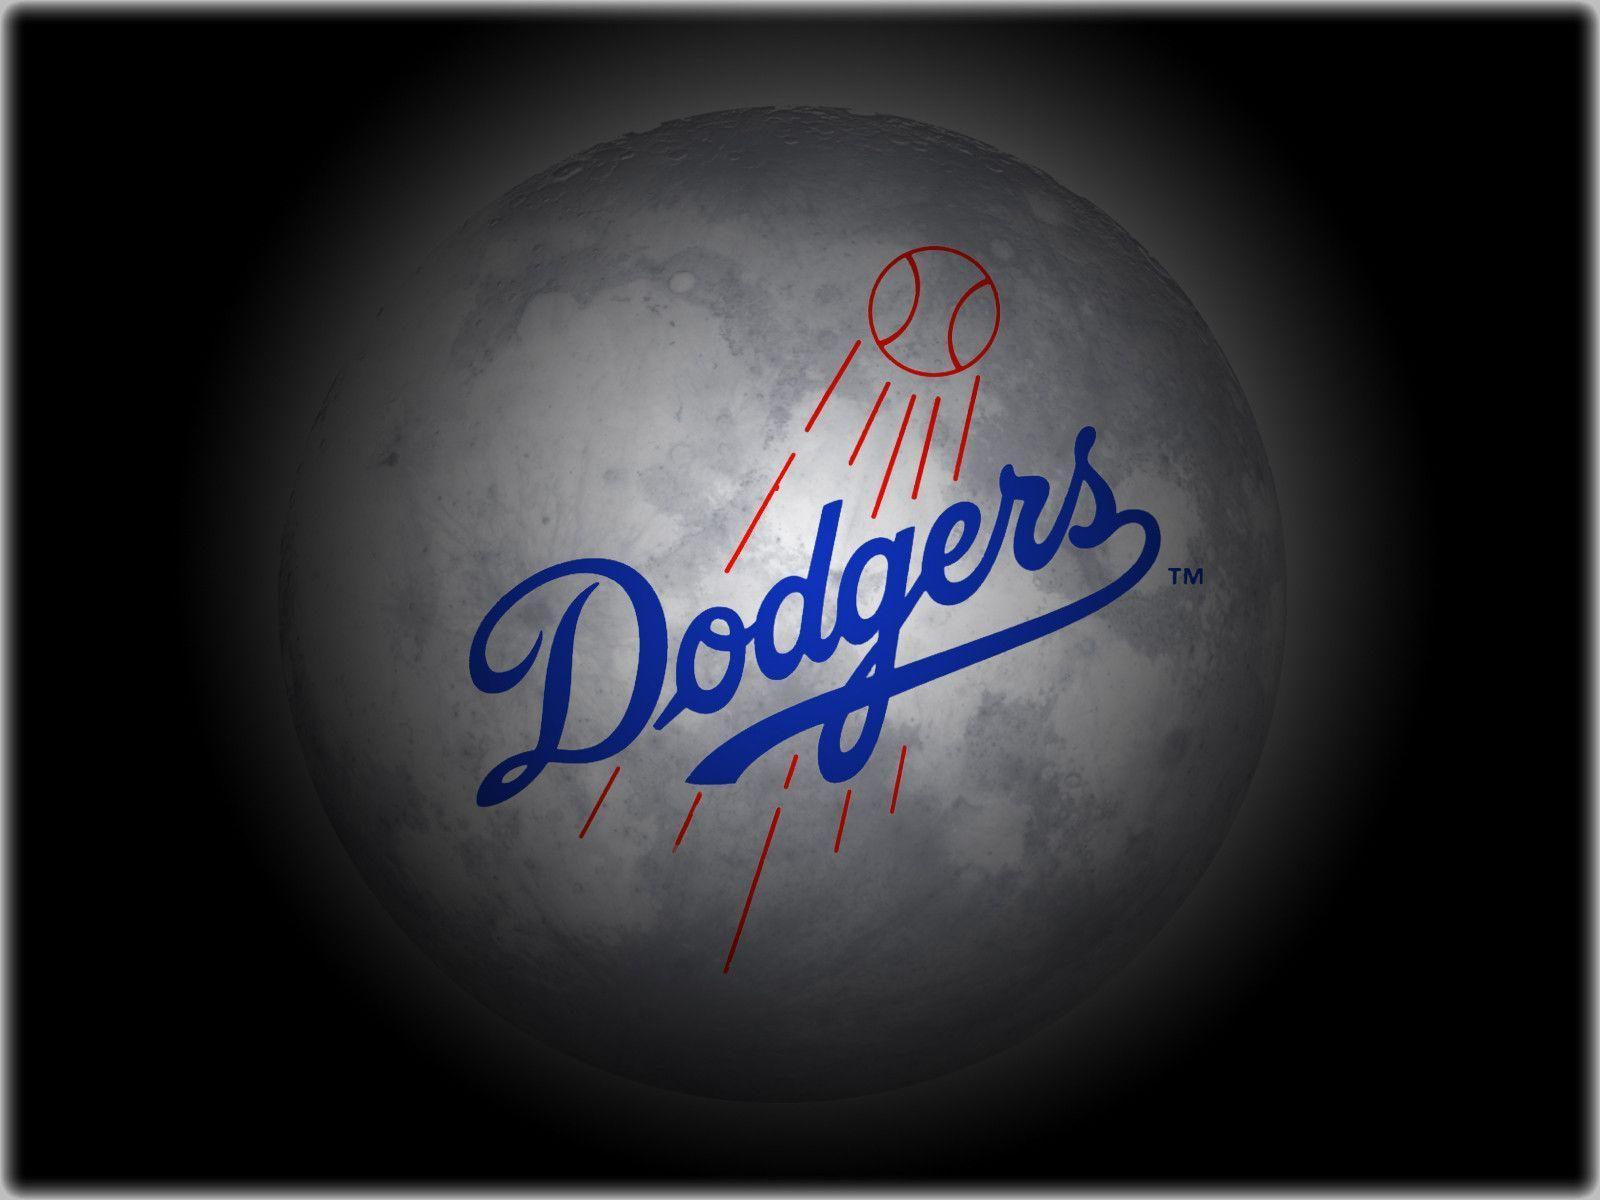 Wallpaper of the day: Los Angeles Dodgers. Los Angeles Dodgers